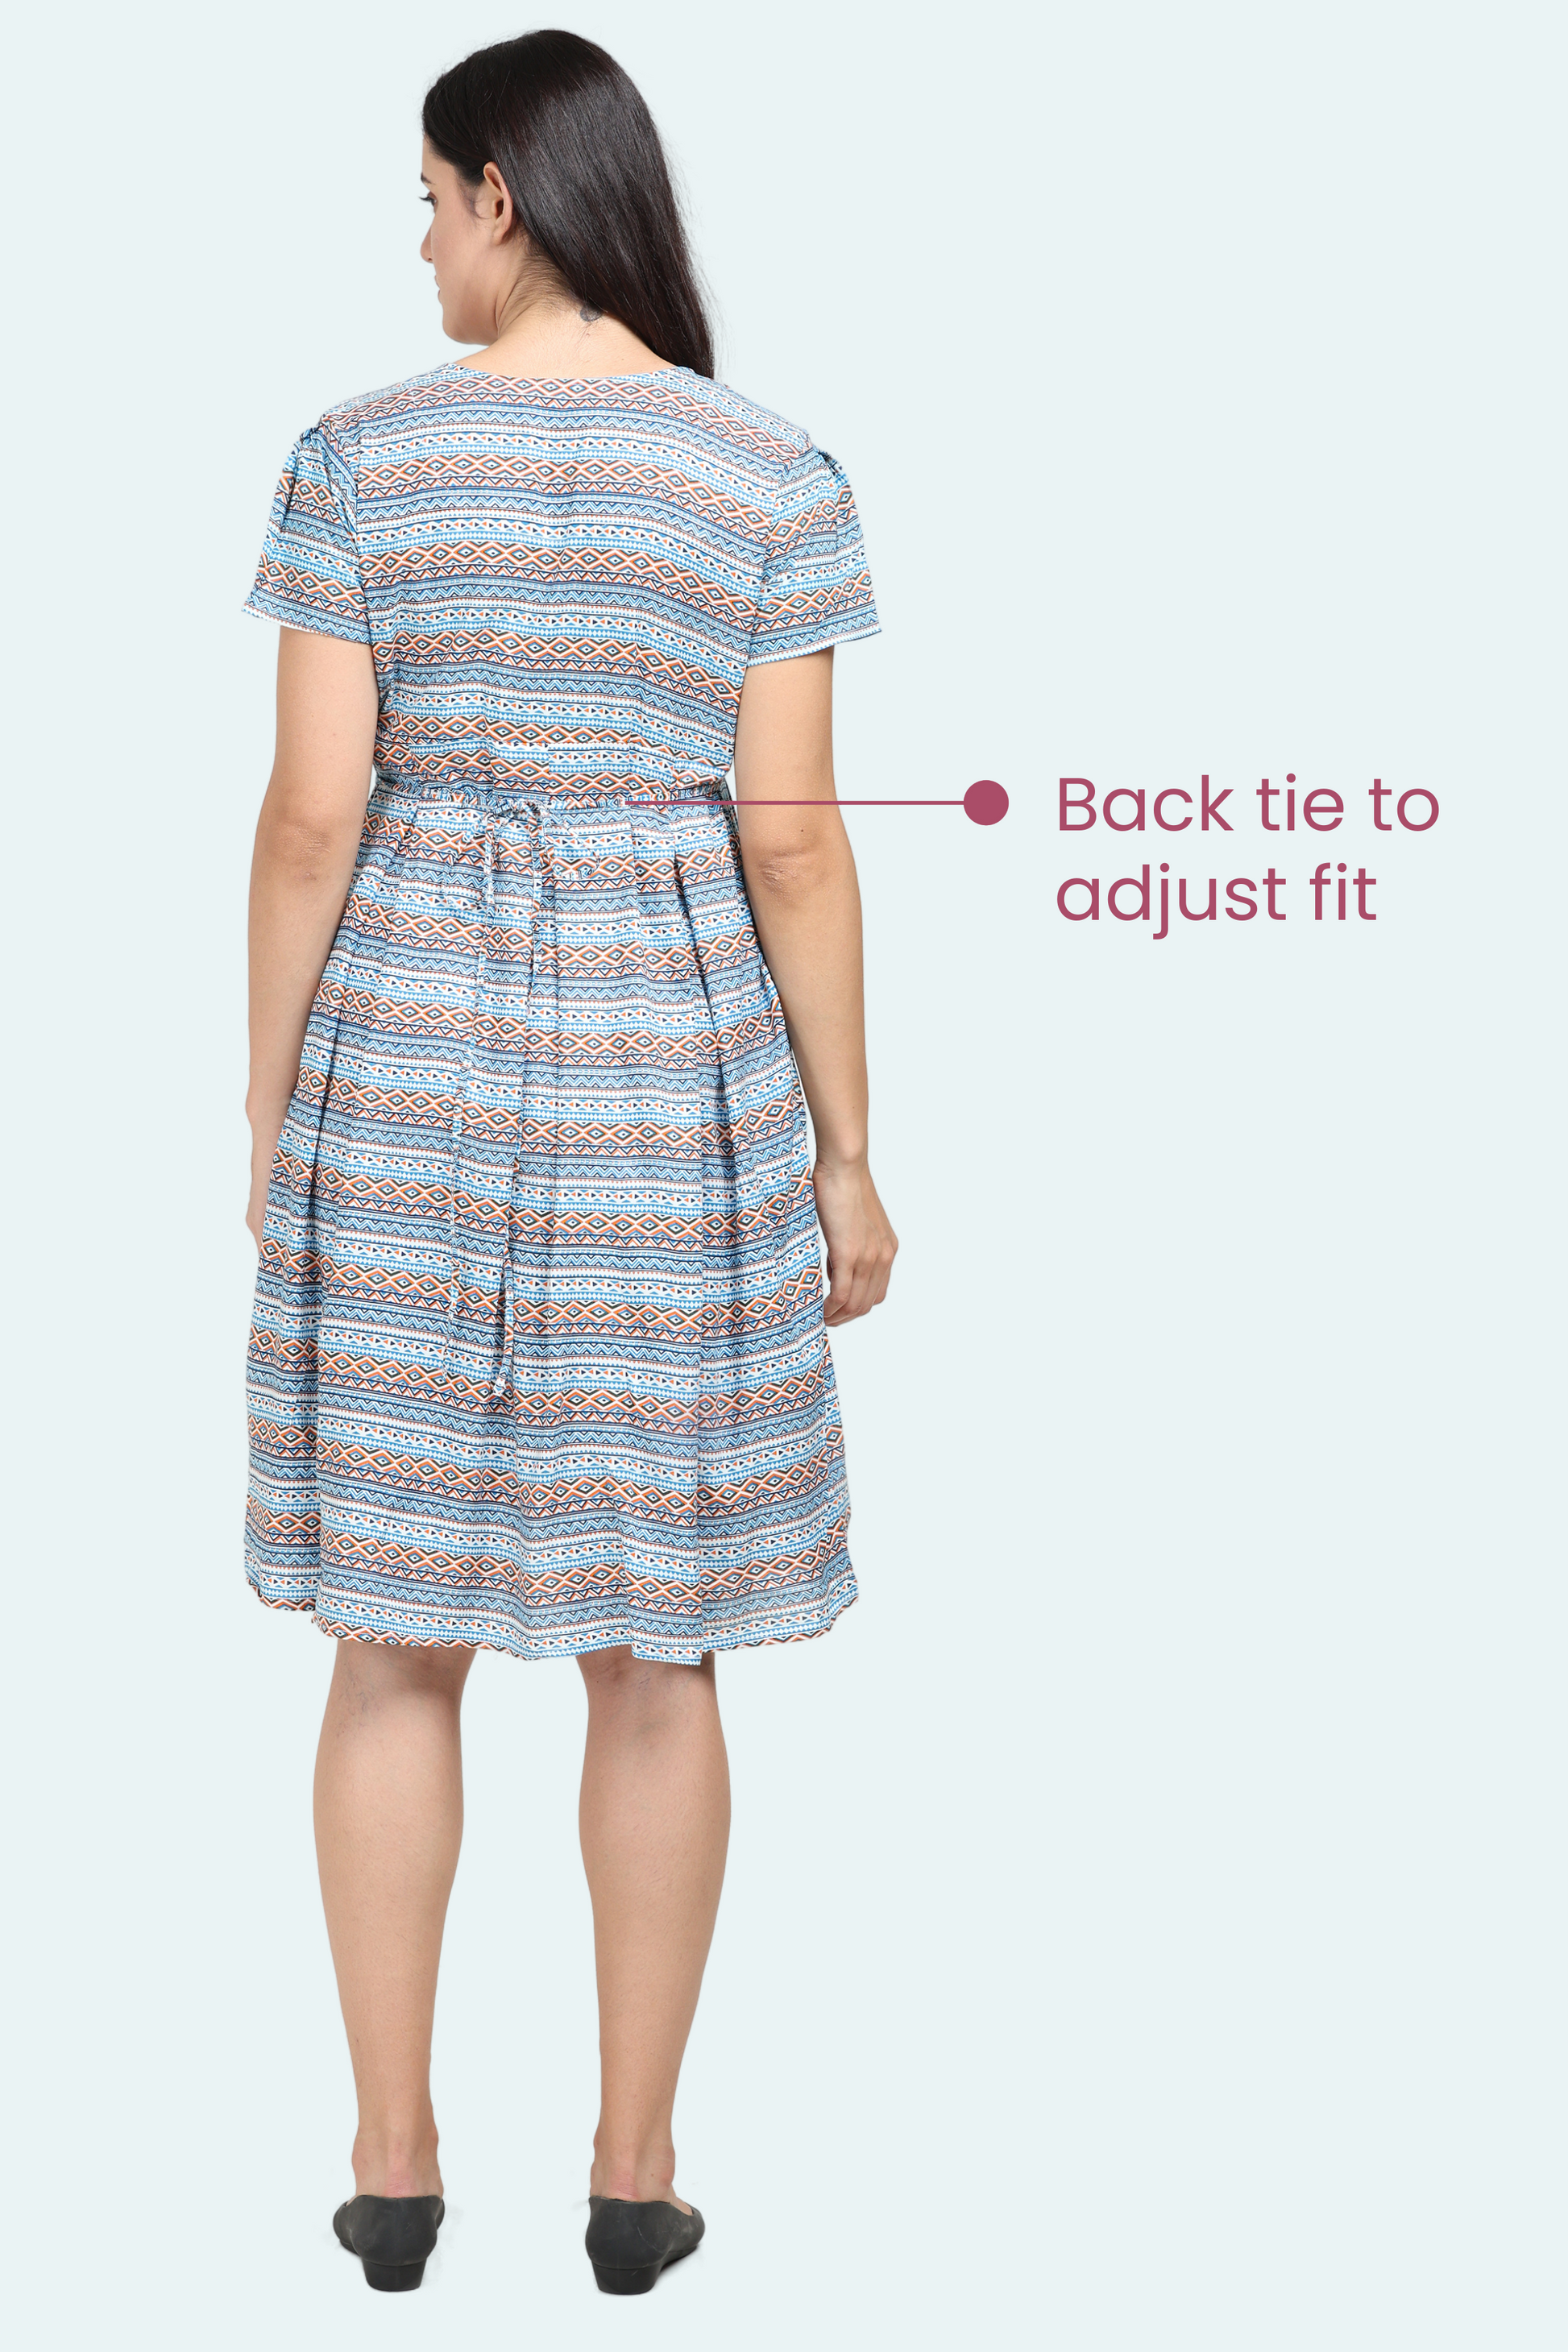 Feeding Dress With Back Tie Adjust ment